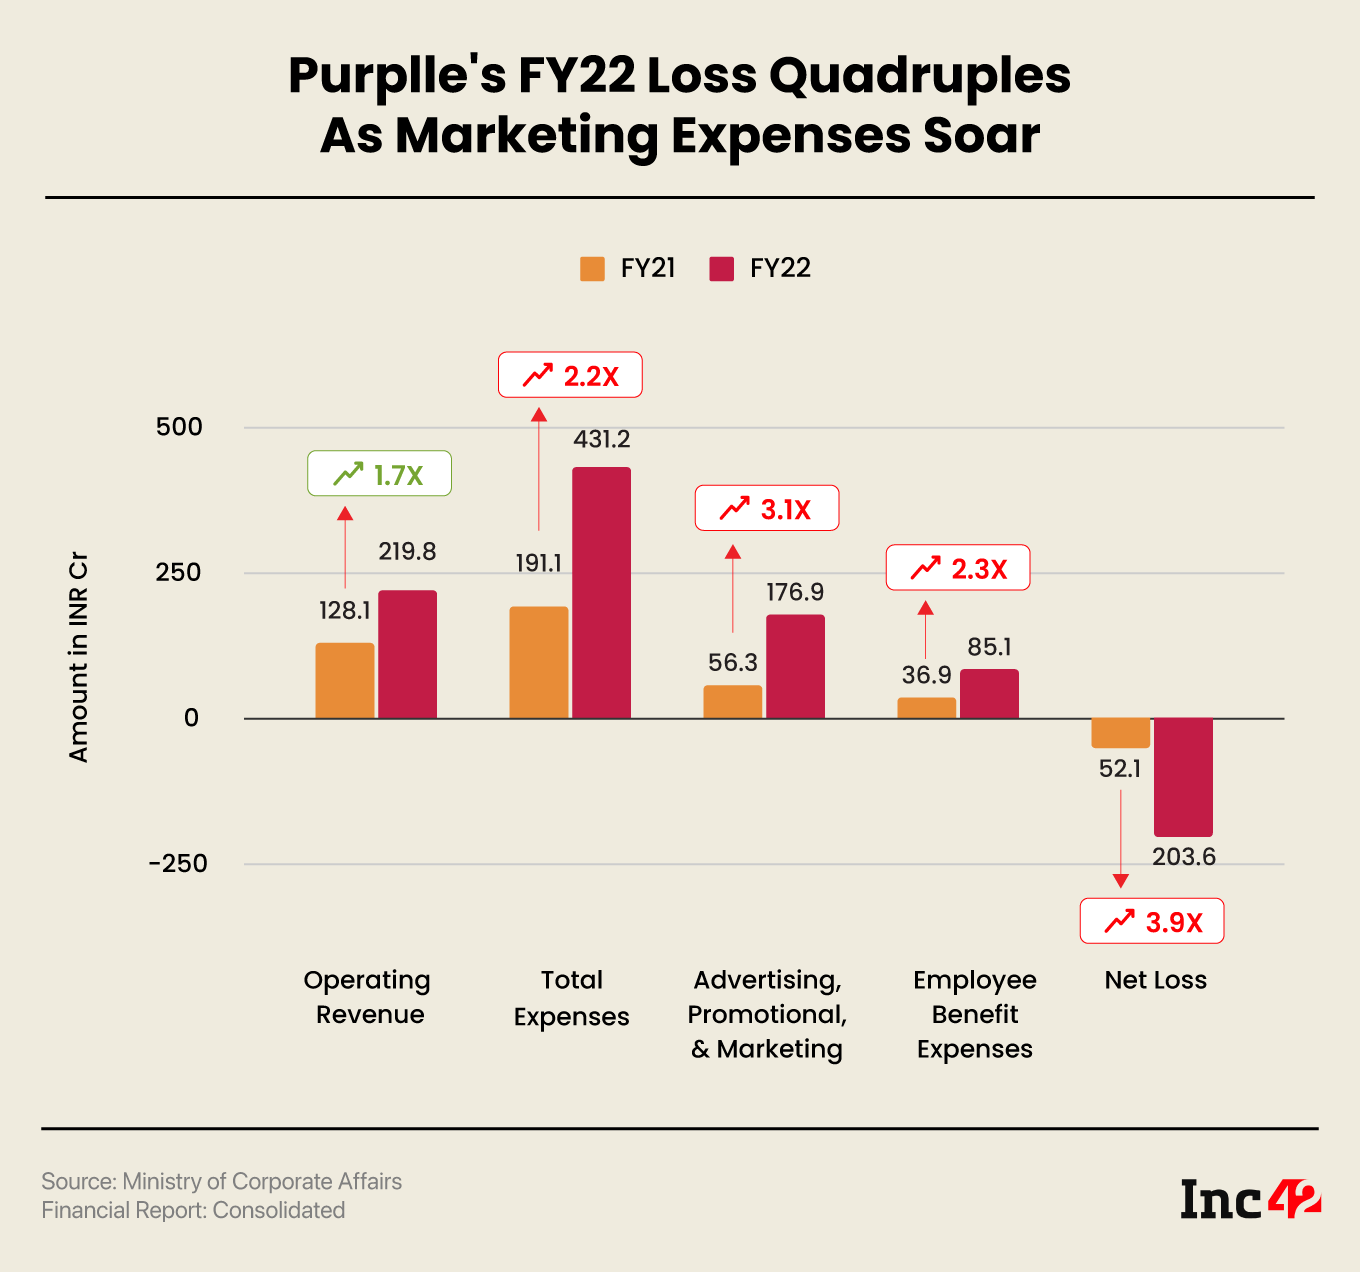 Purplle’s Loss Surges 3.9X YoY To INR 203.6 Cr In FY22, Sales Jump To INR 220 Cr